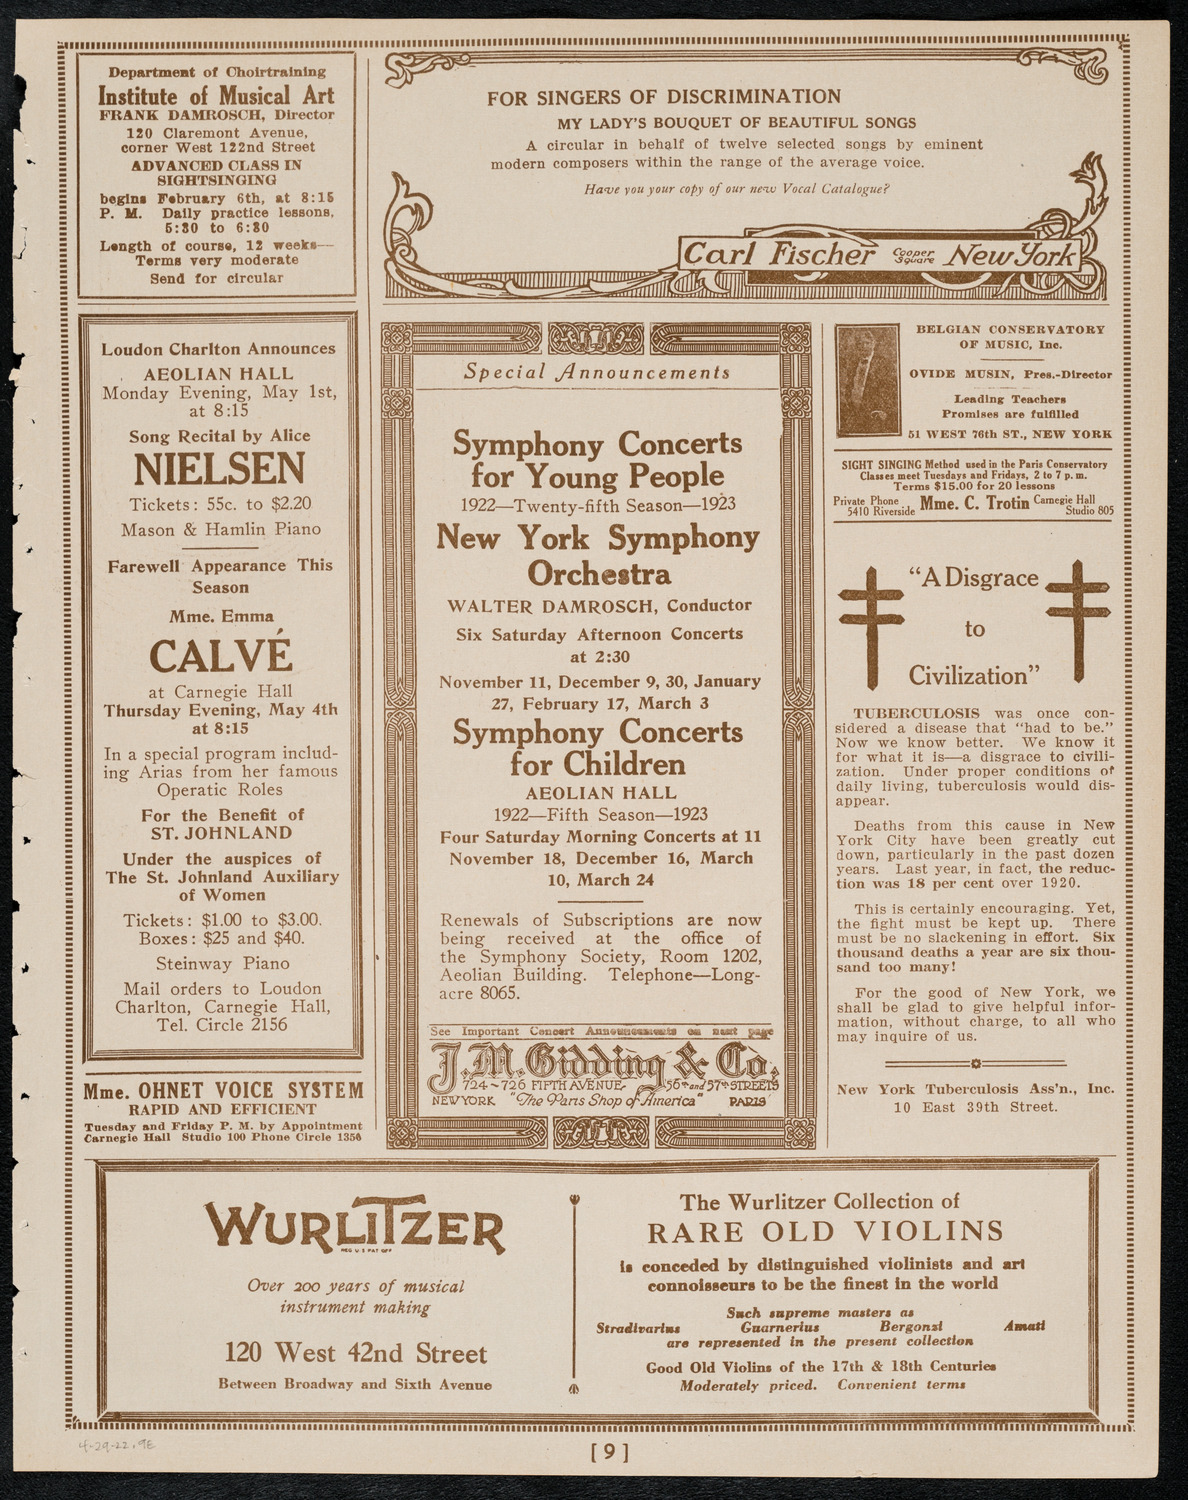 Mecca Temple of New York: Ancient Arabic Order of the Nobles of the Mystic Shrine, April 29, 1922, program page 9